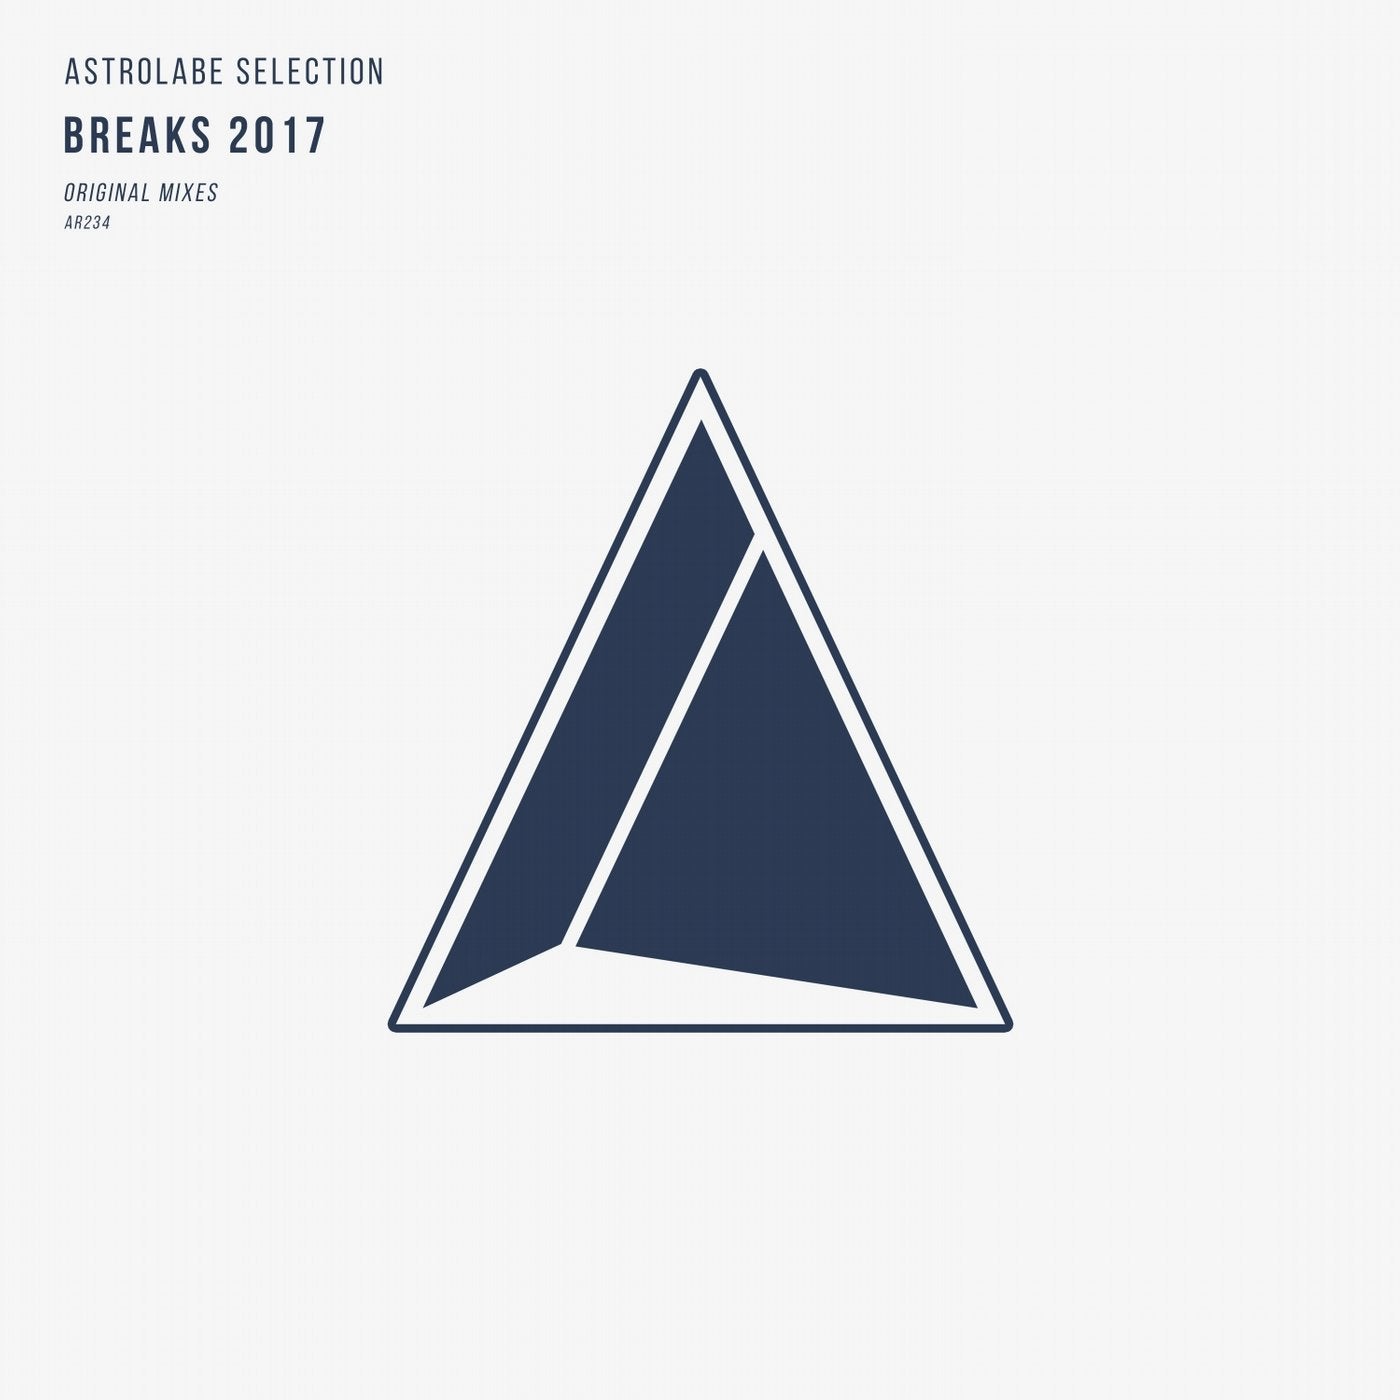 Astrolabe Selection: Breaks 2017